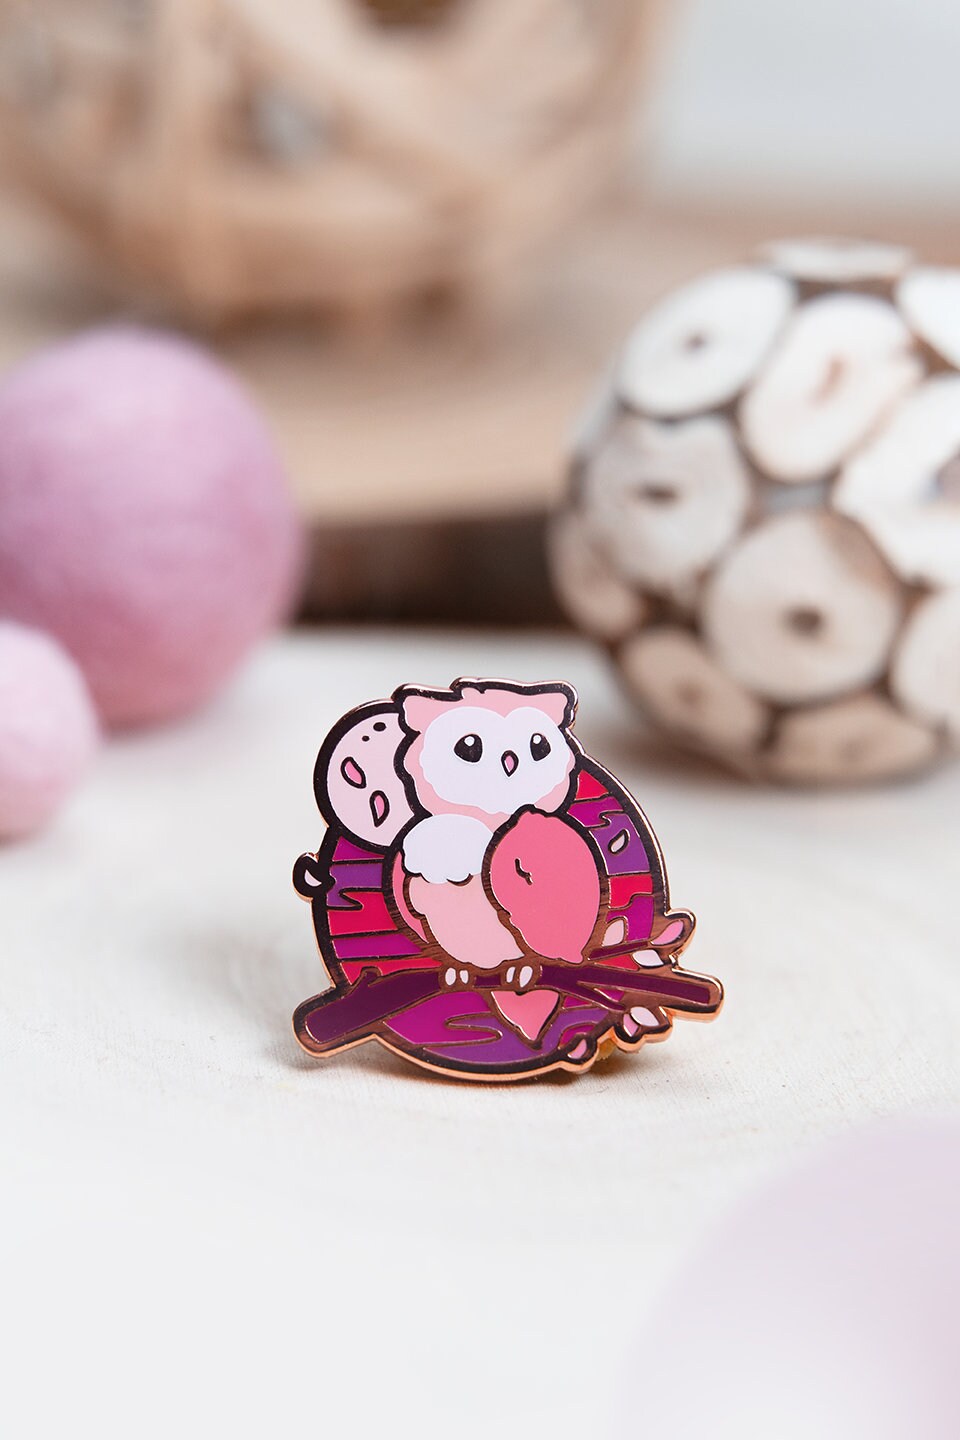 Magical Sunset Owl | Collectors Cute Hard Enamel Pin | Kawaii Aesthetic Birthday Gift for Her | Christmas Present for Him | Art by Miamouz